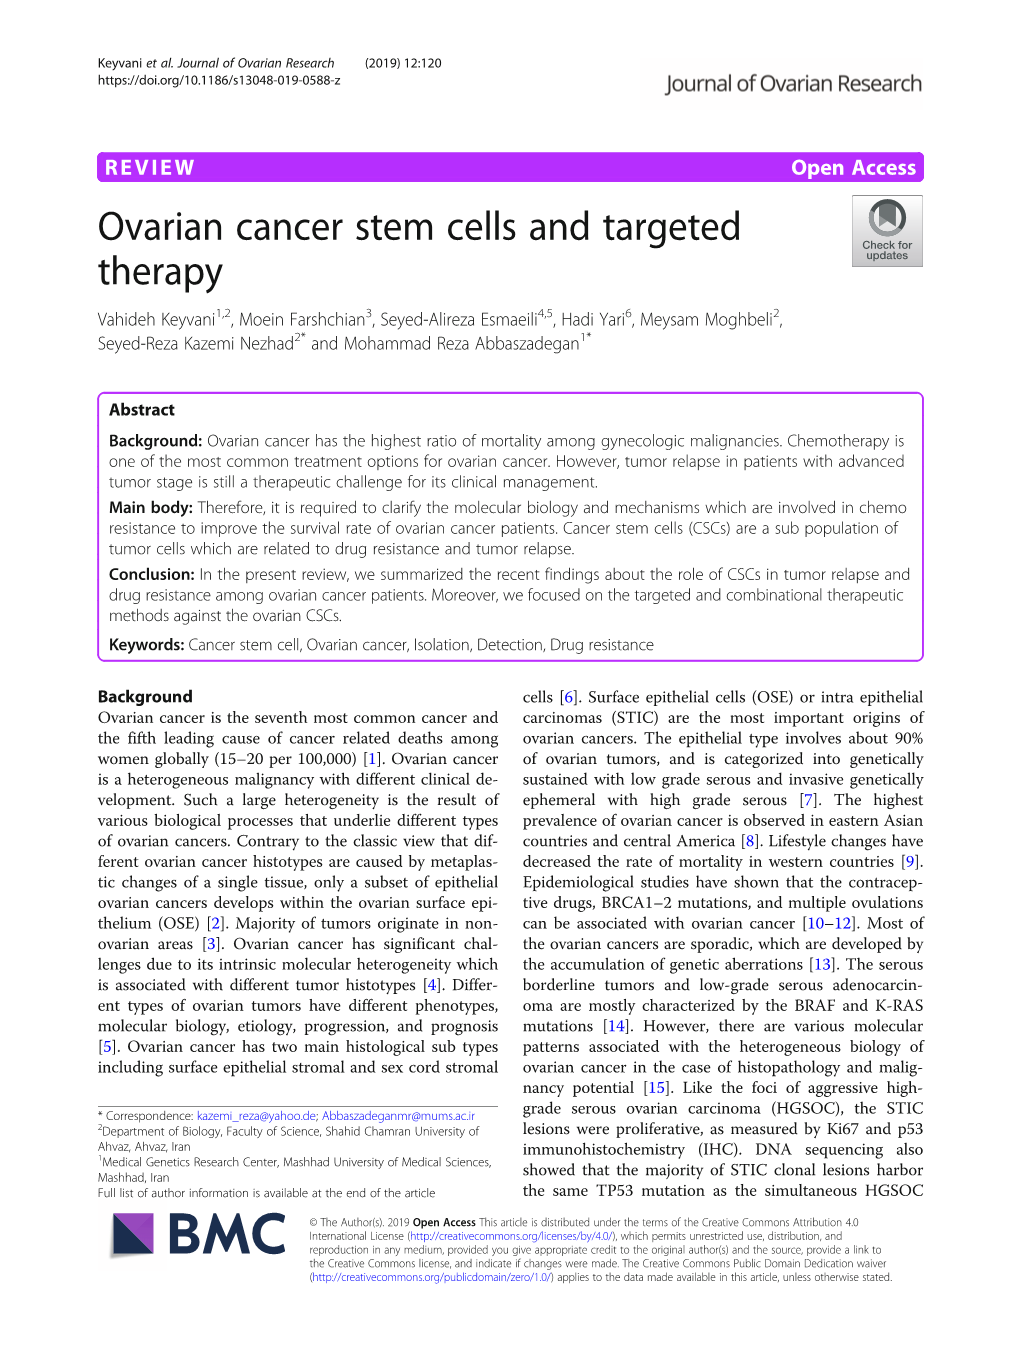 Ovarian Cancer Stem Cells and Targeted Therapy